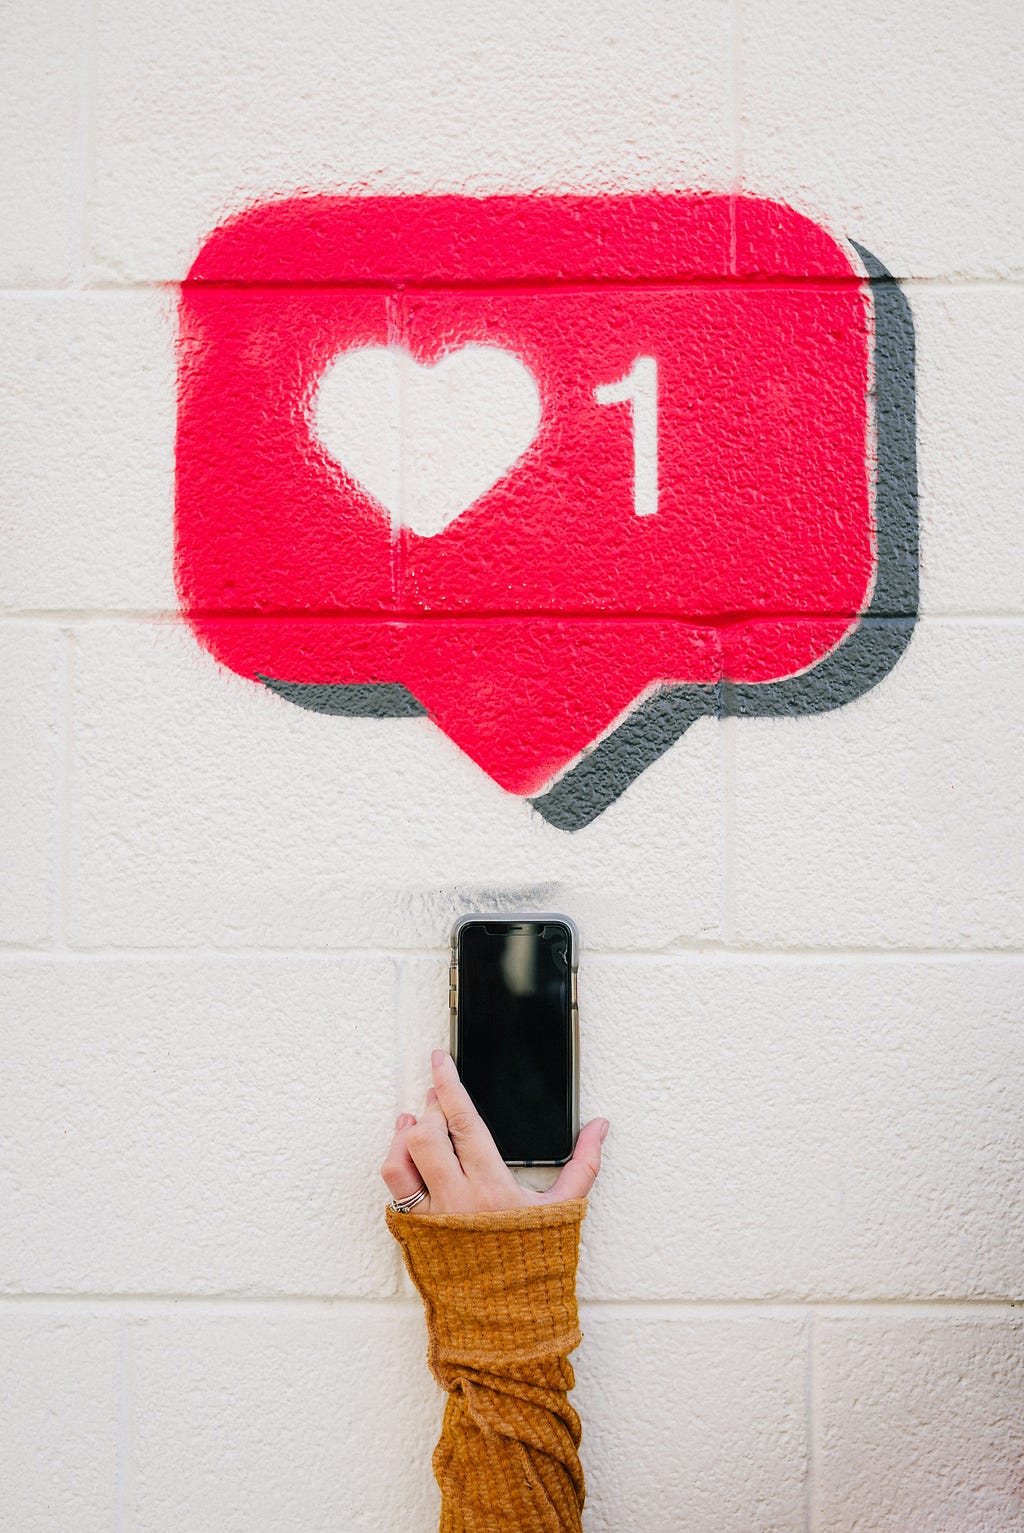 Like graffiti (with heart and the number one beside it) painted on the wall behind someone holding up their phone, so the like appears to be coming from it